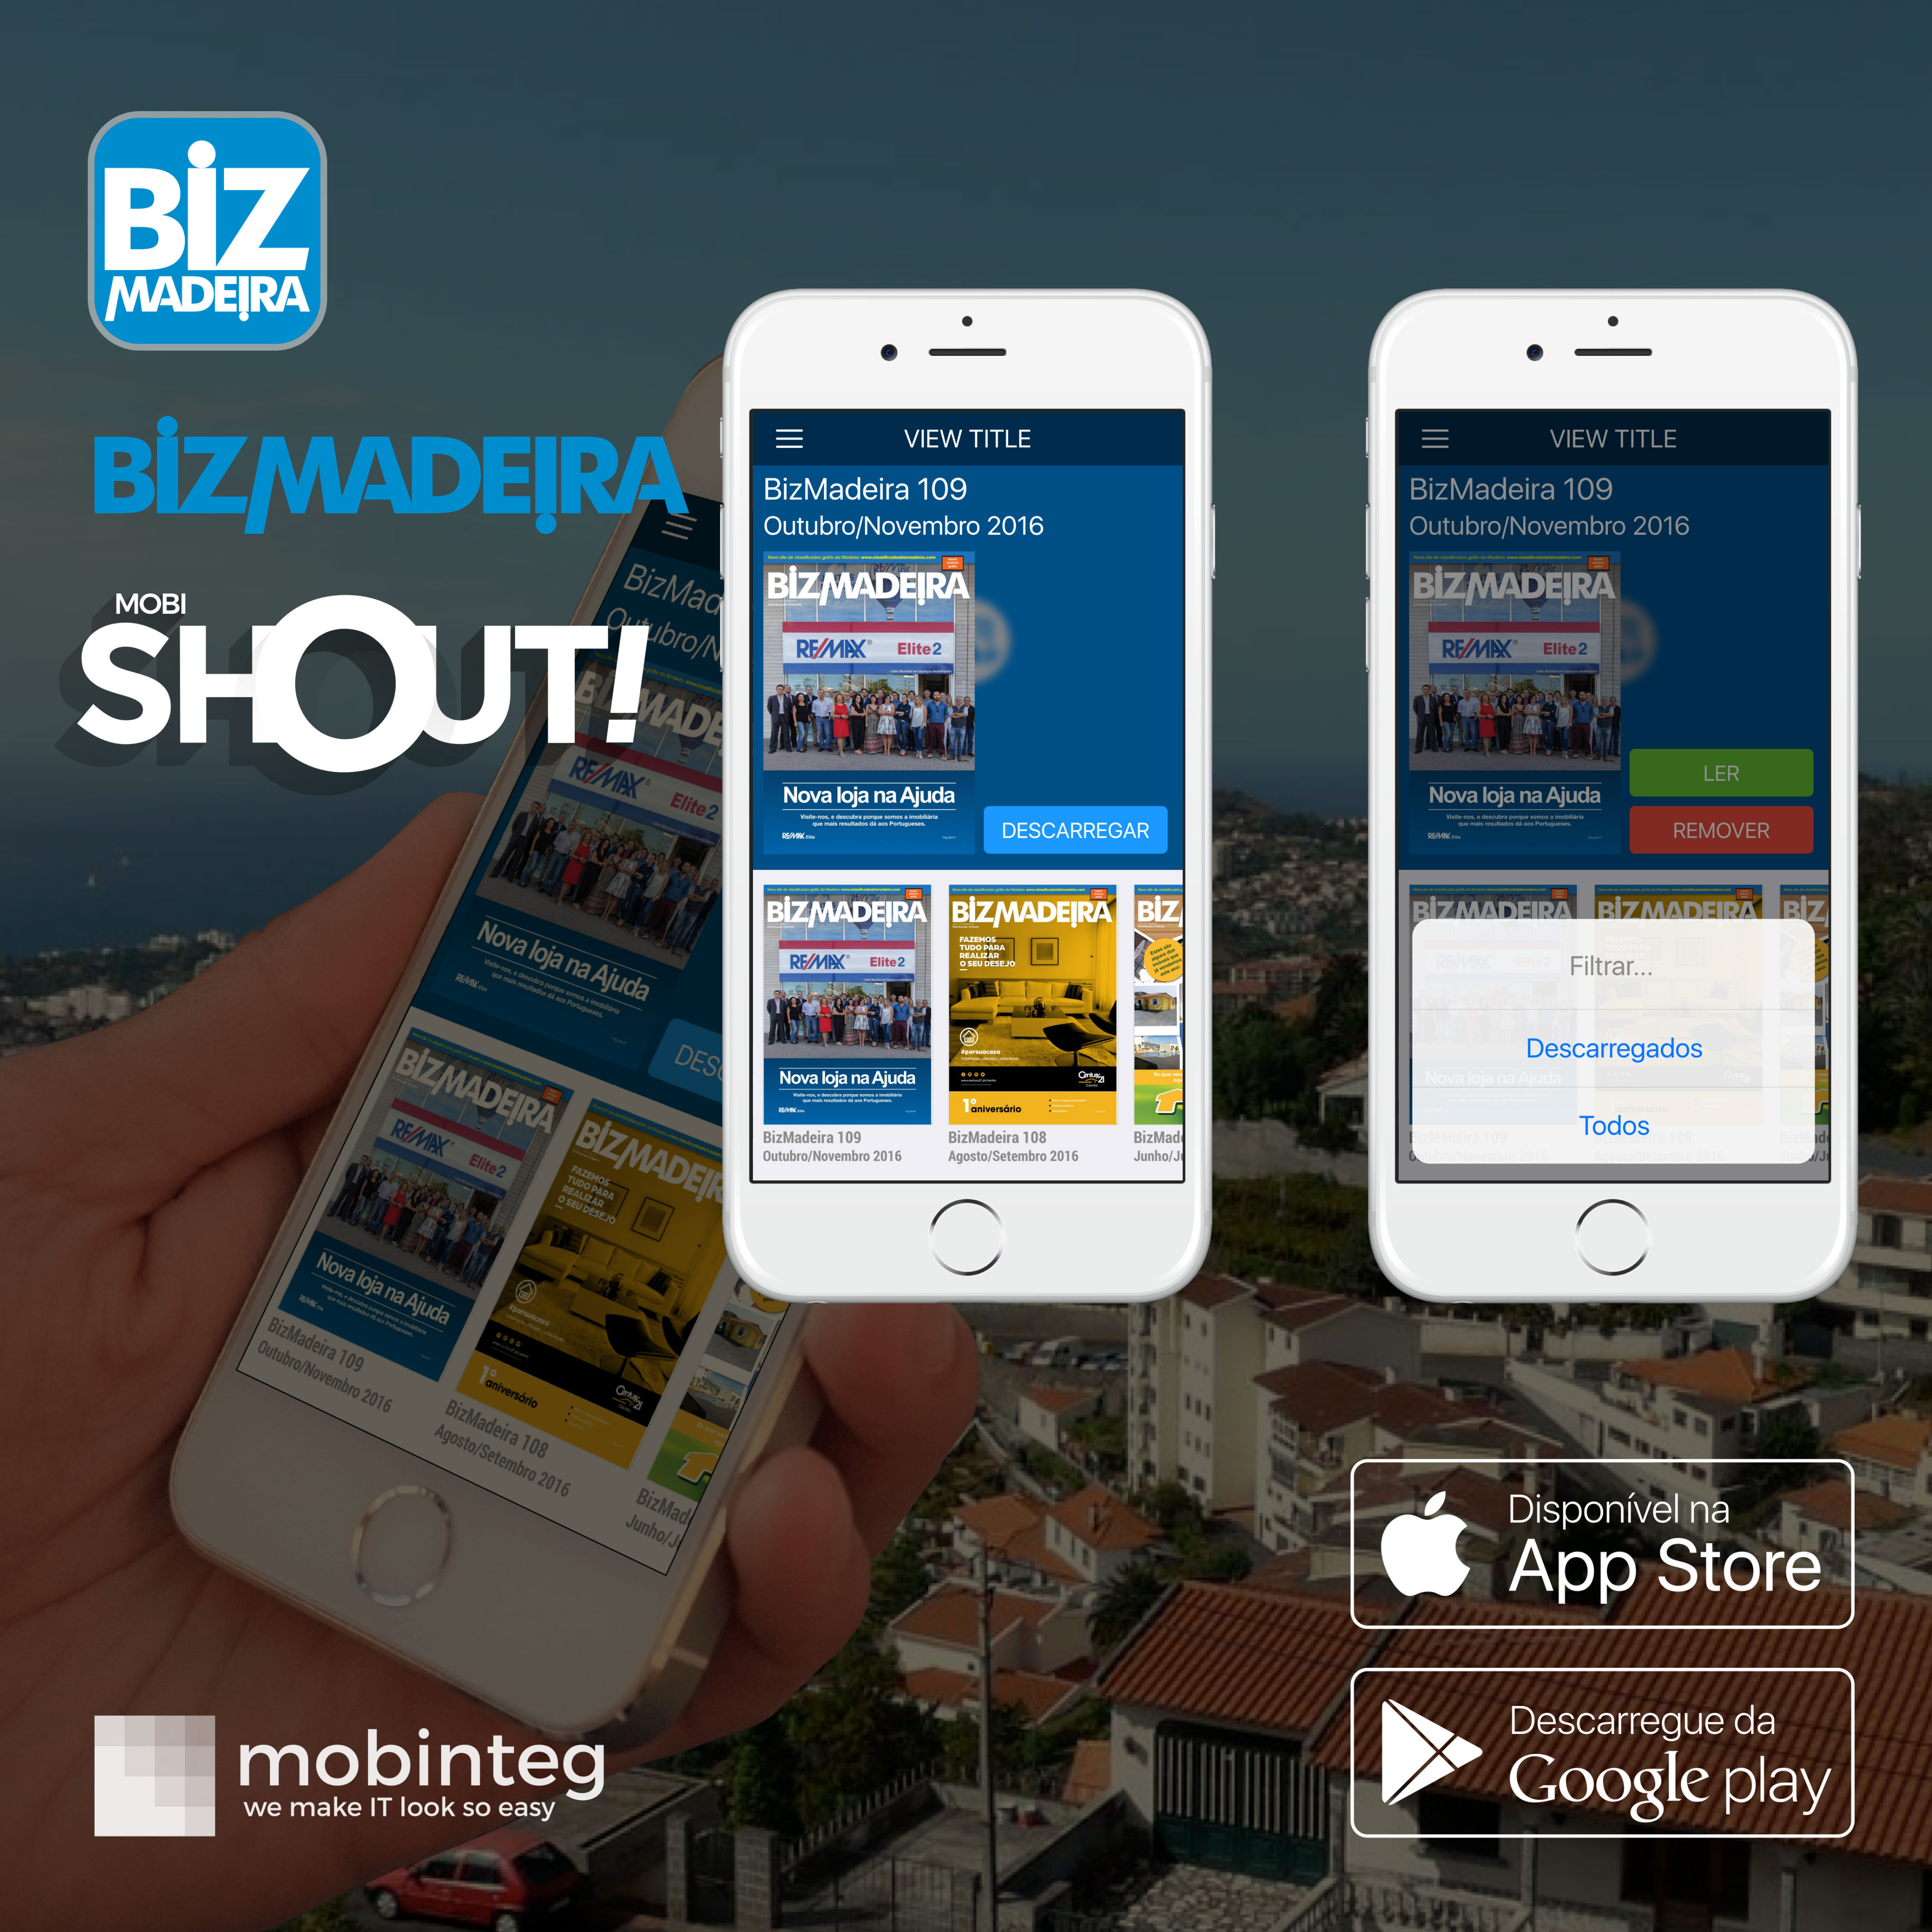 BIZMADEIRA hits the “newstands” of App Store and Google Play